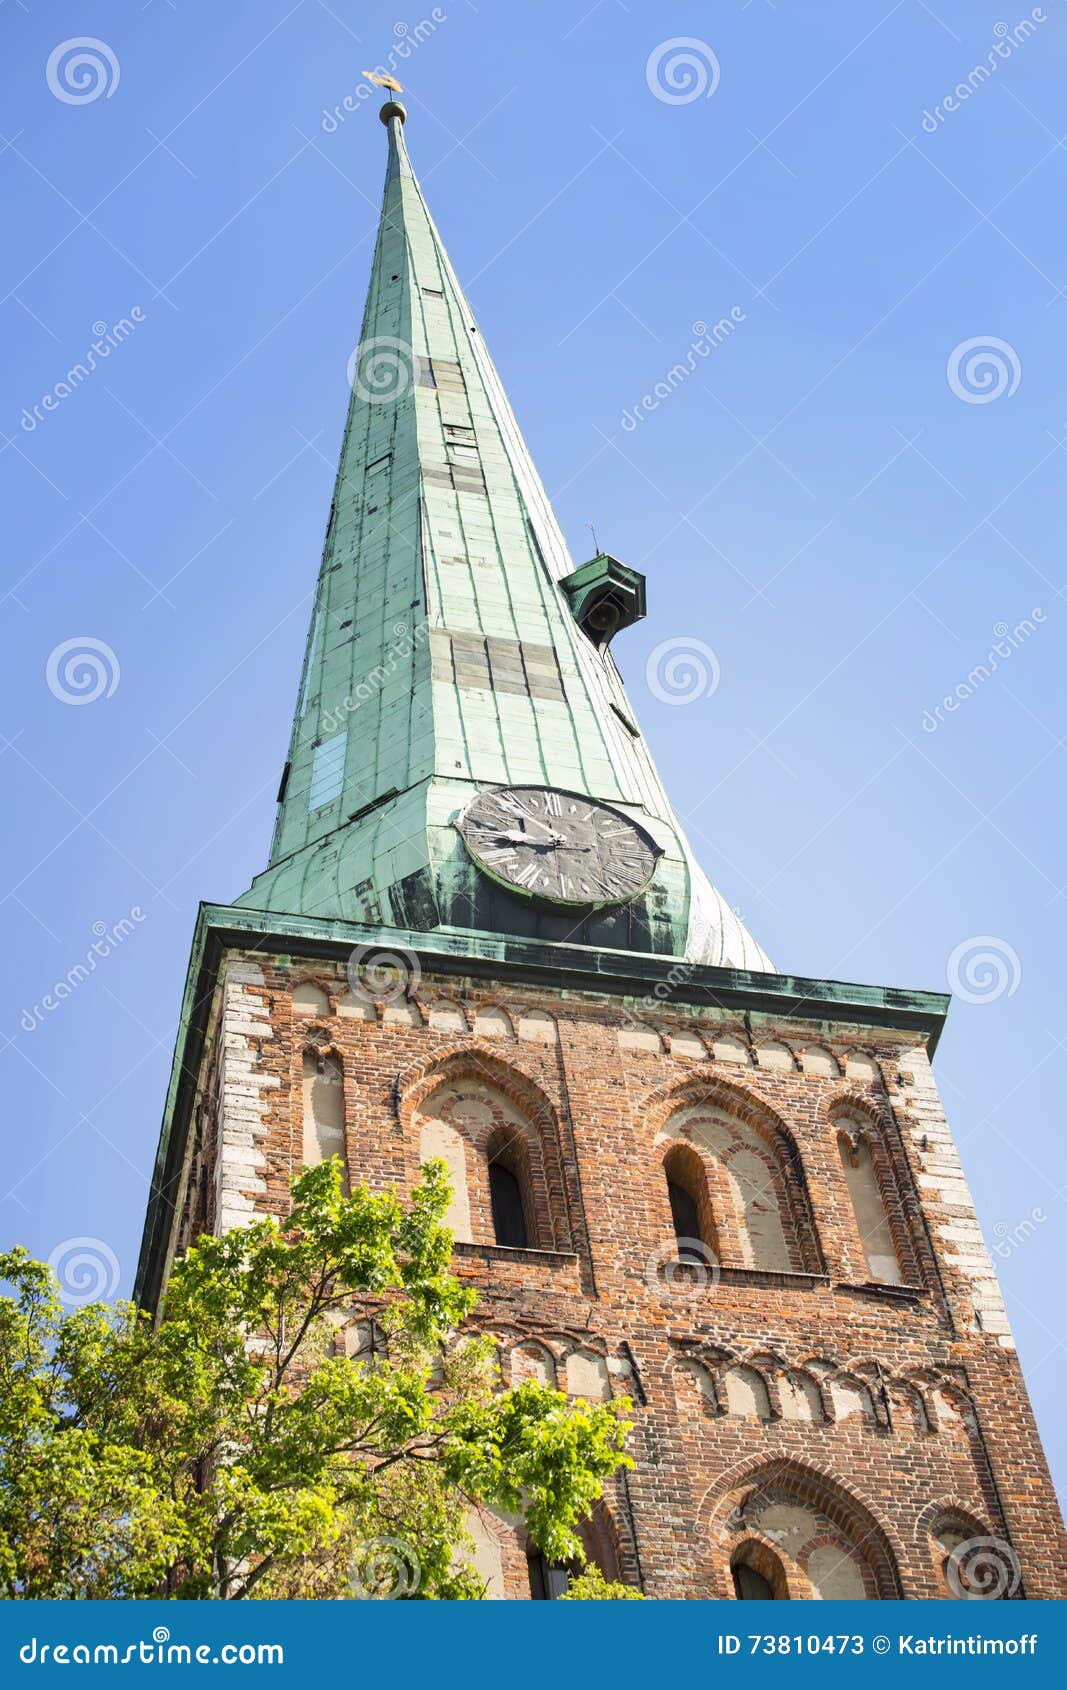 architectural details of saint pyotr's church - cathedral church of roman catholic diocese of riga